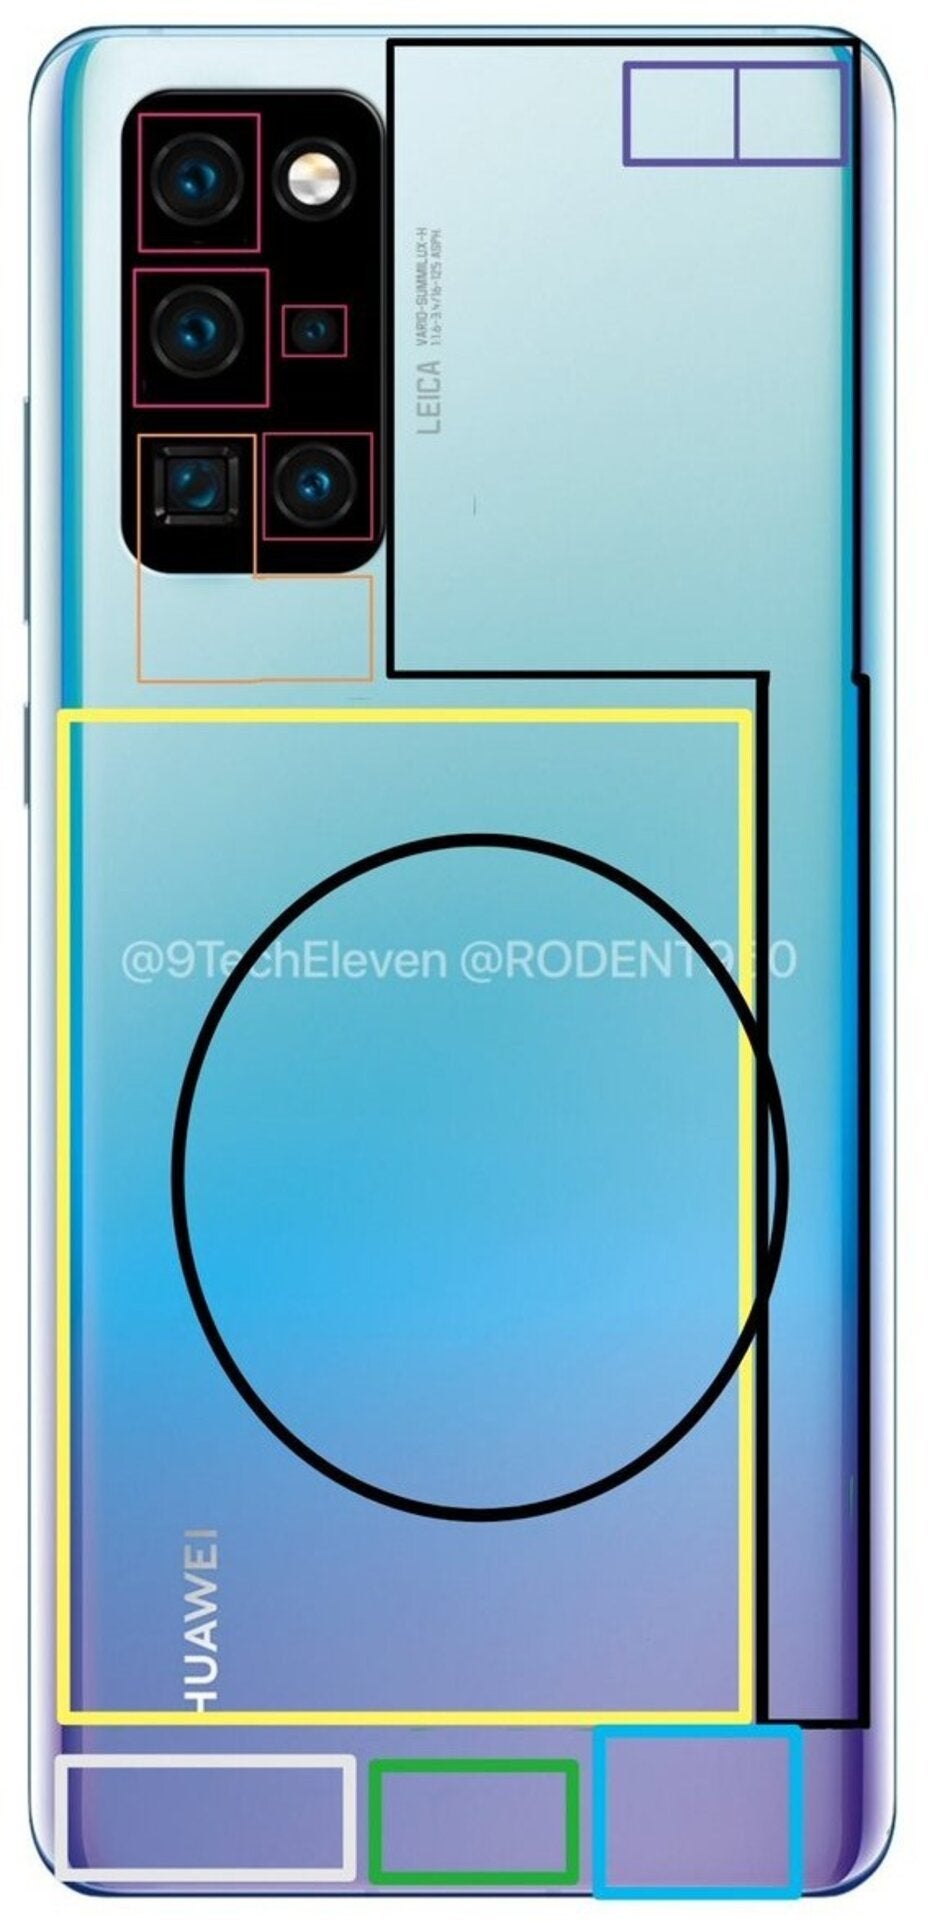 Huawei P40 Pro component layout - These Huawei P40 Pro renders give us our best look yet at the flagship